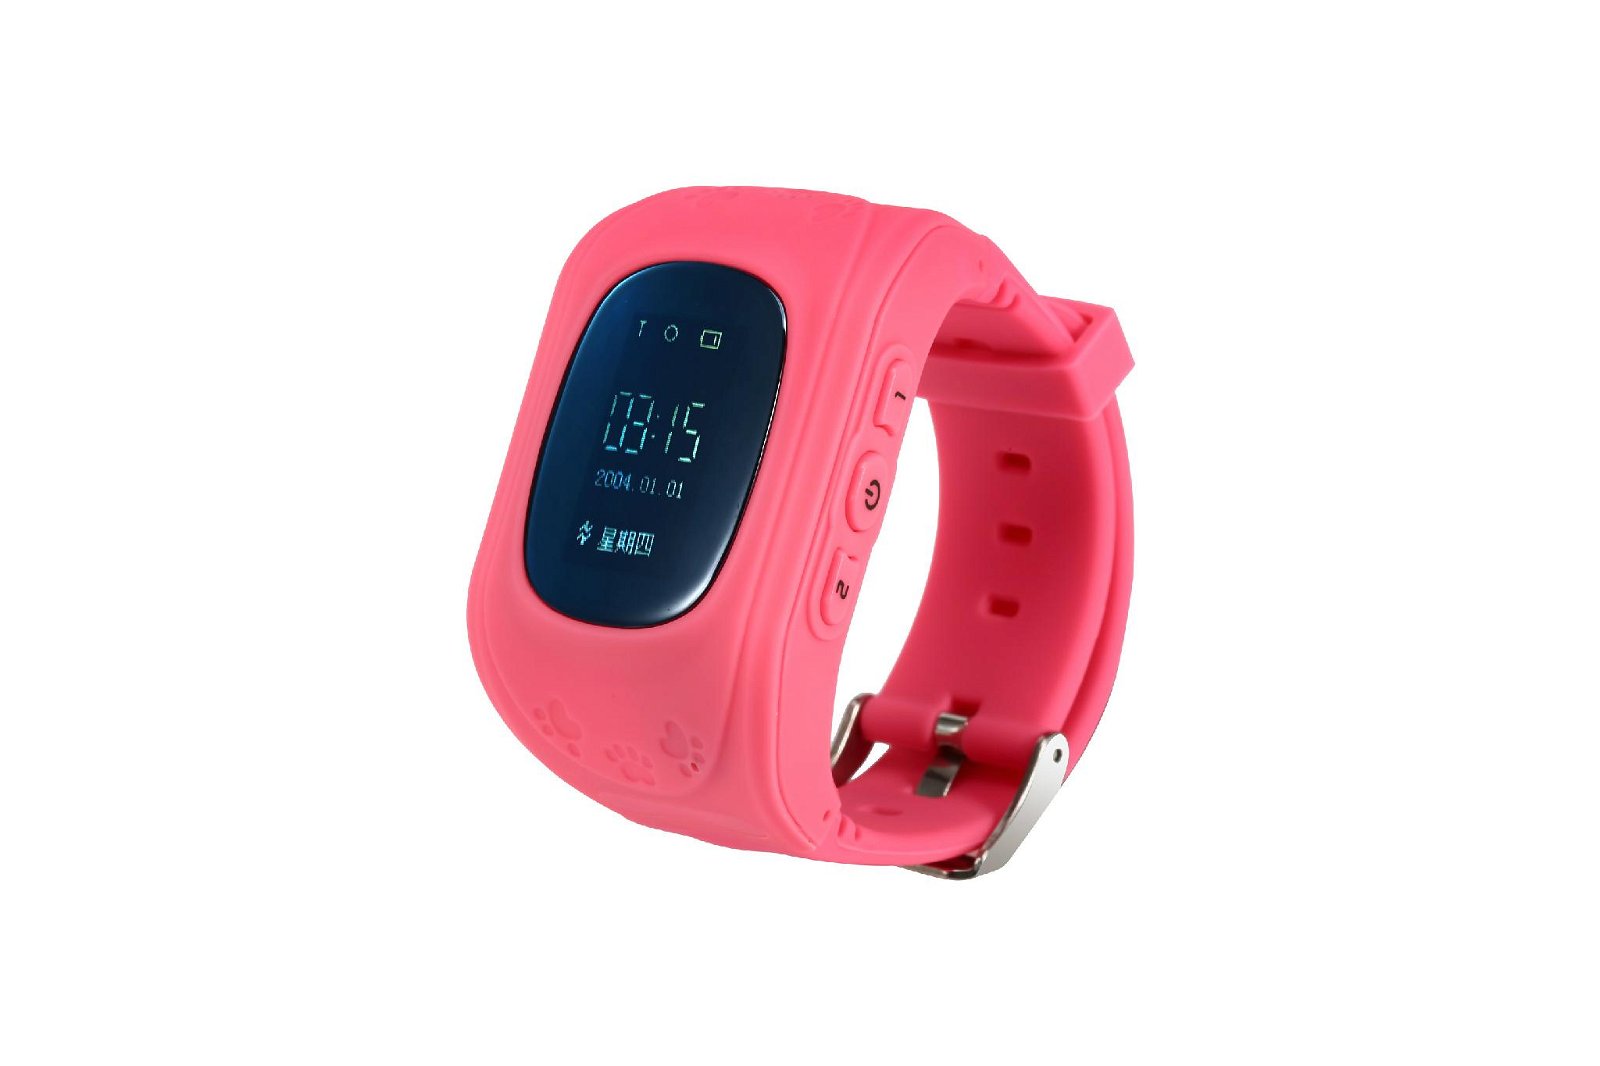 Kids gsm gps tracker watch kids cell phone watch q50 - q50 gps watch - q50  kids gps watch (China Manufacturer) - Safety Products - Security